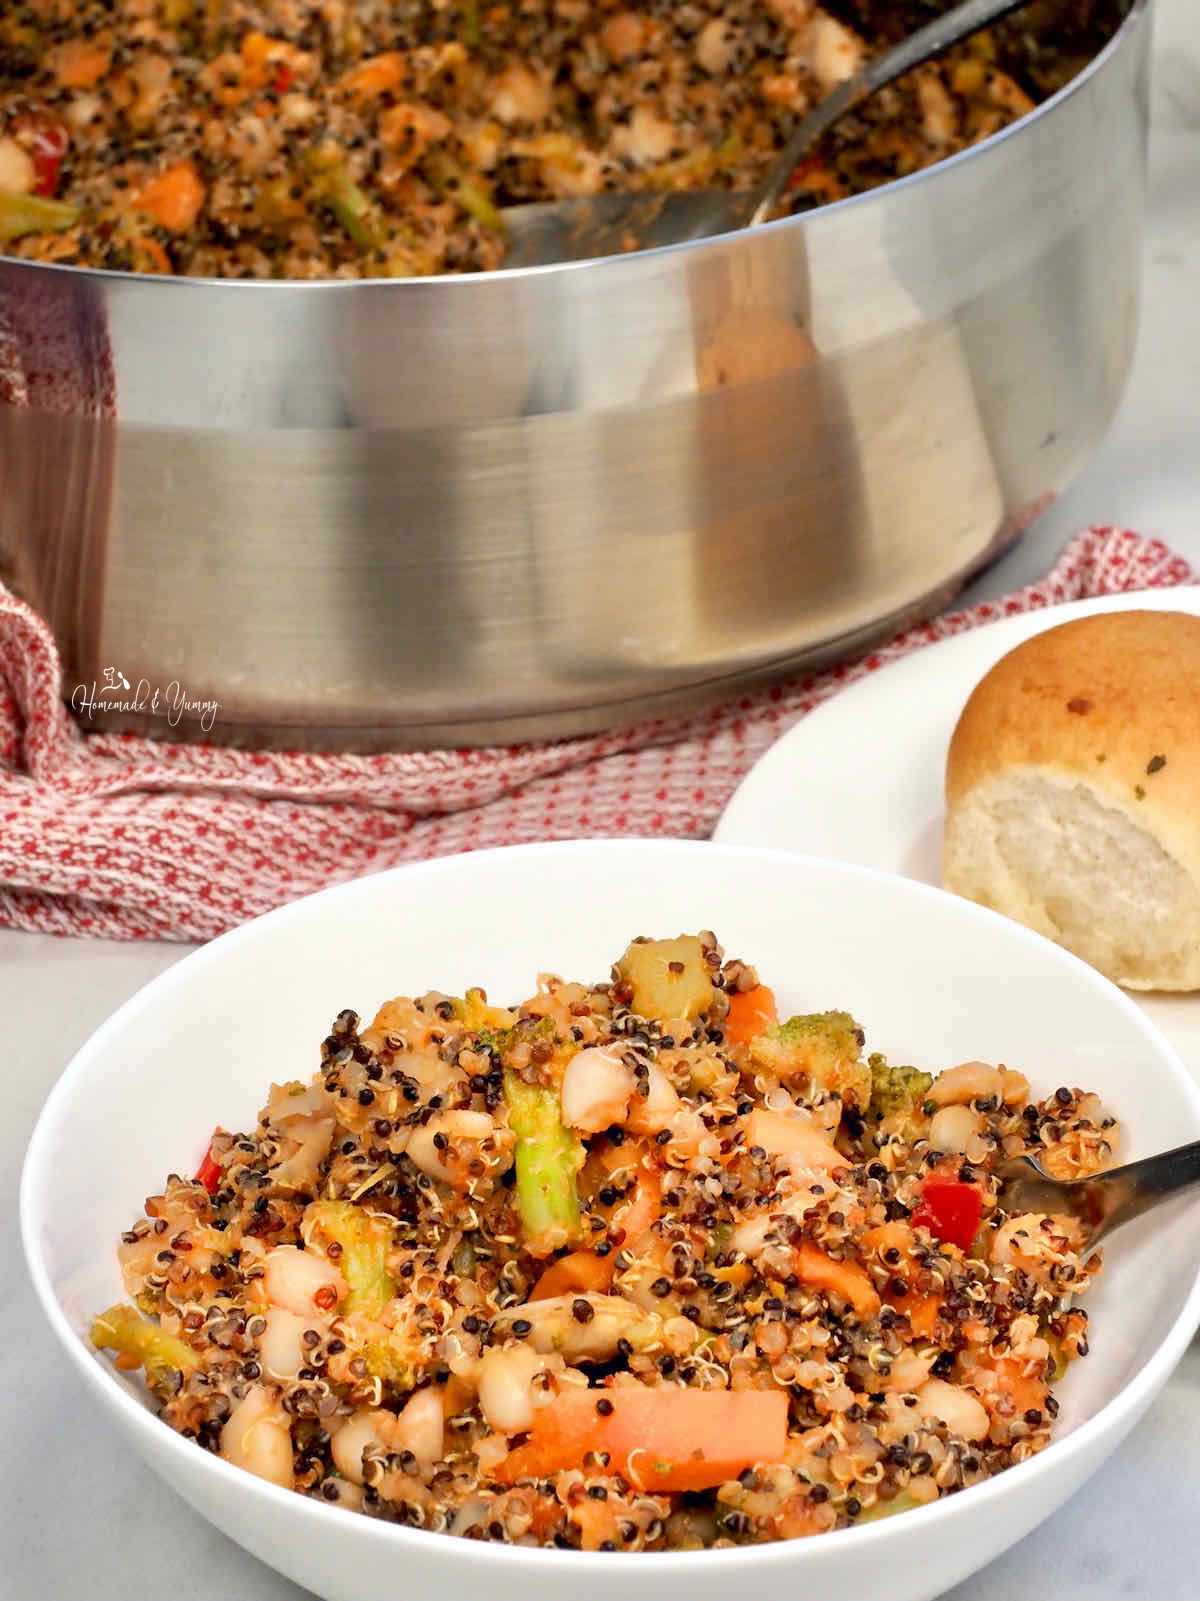 Quinoa vegetable casserole with beans.